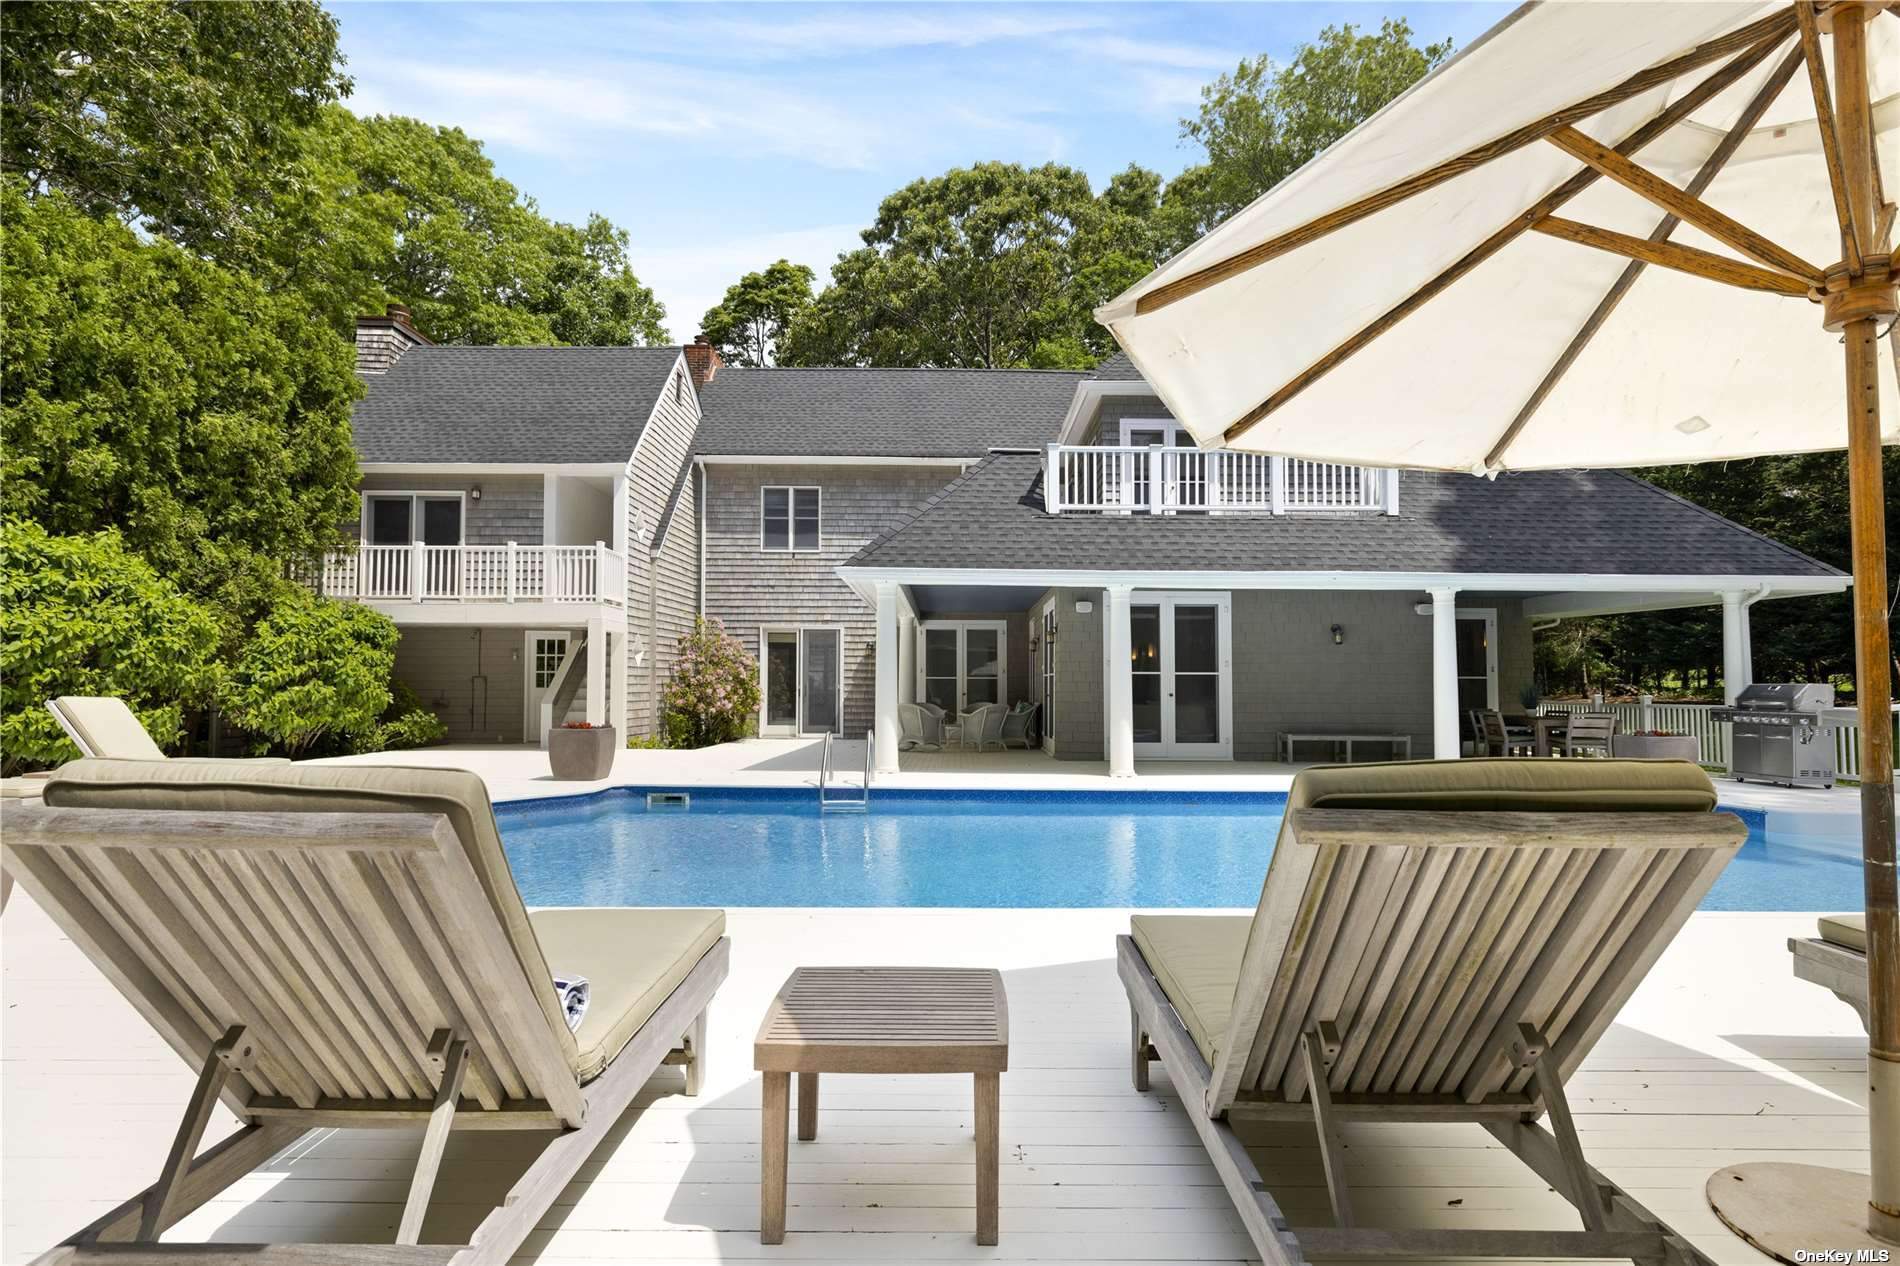 a view of a house with pool and chairs